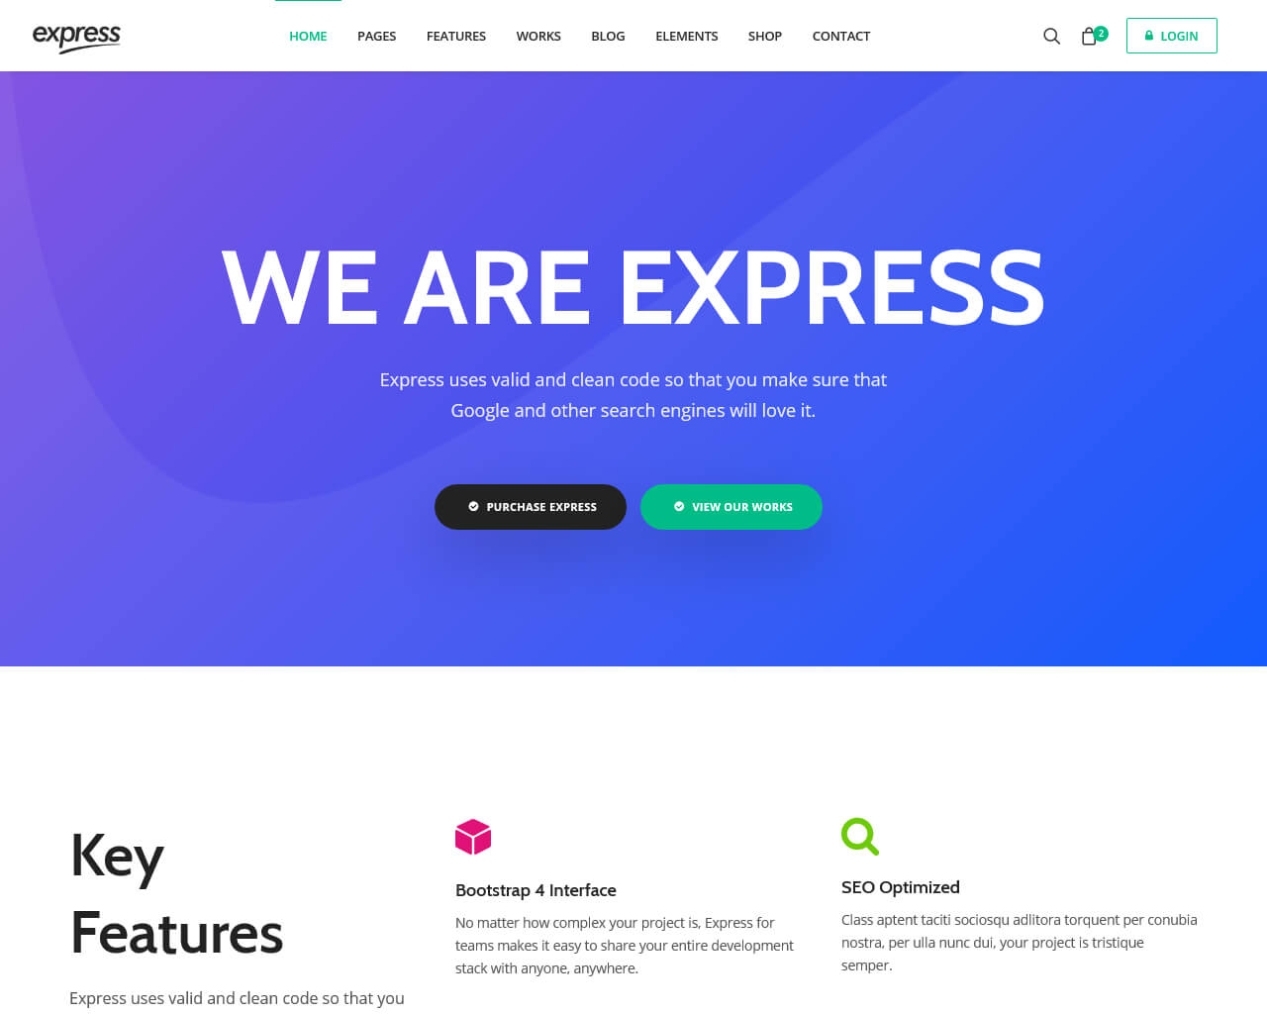 25+ Pro Business Website Templates 2019 - Templatemag Pertaining To Professional Website Templates For Business